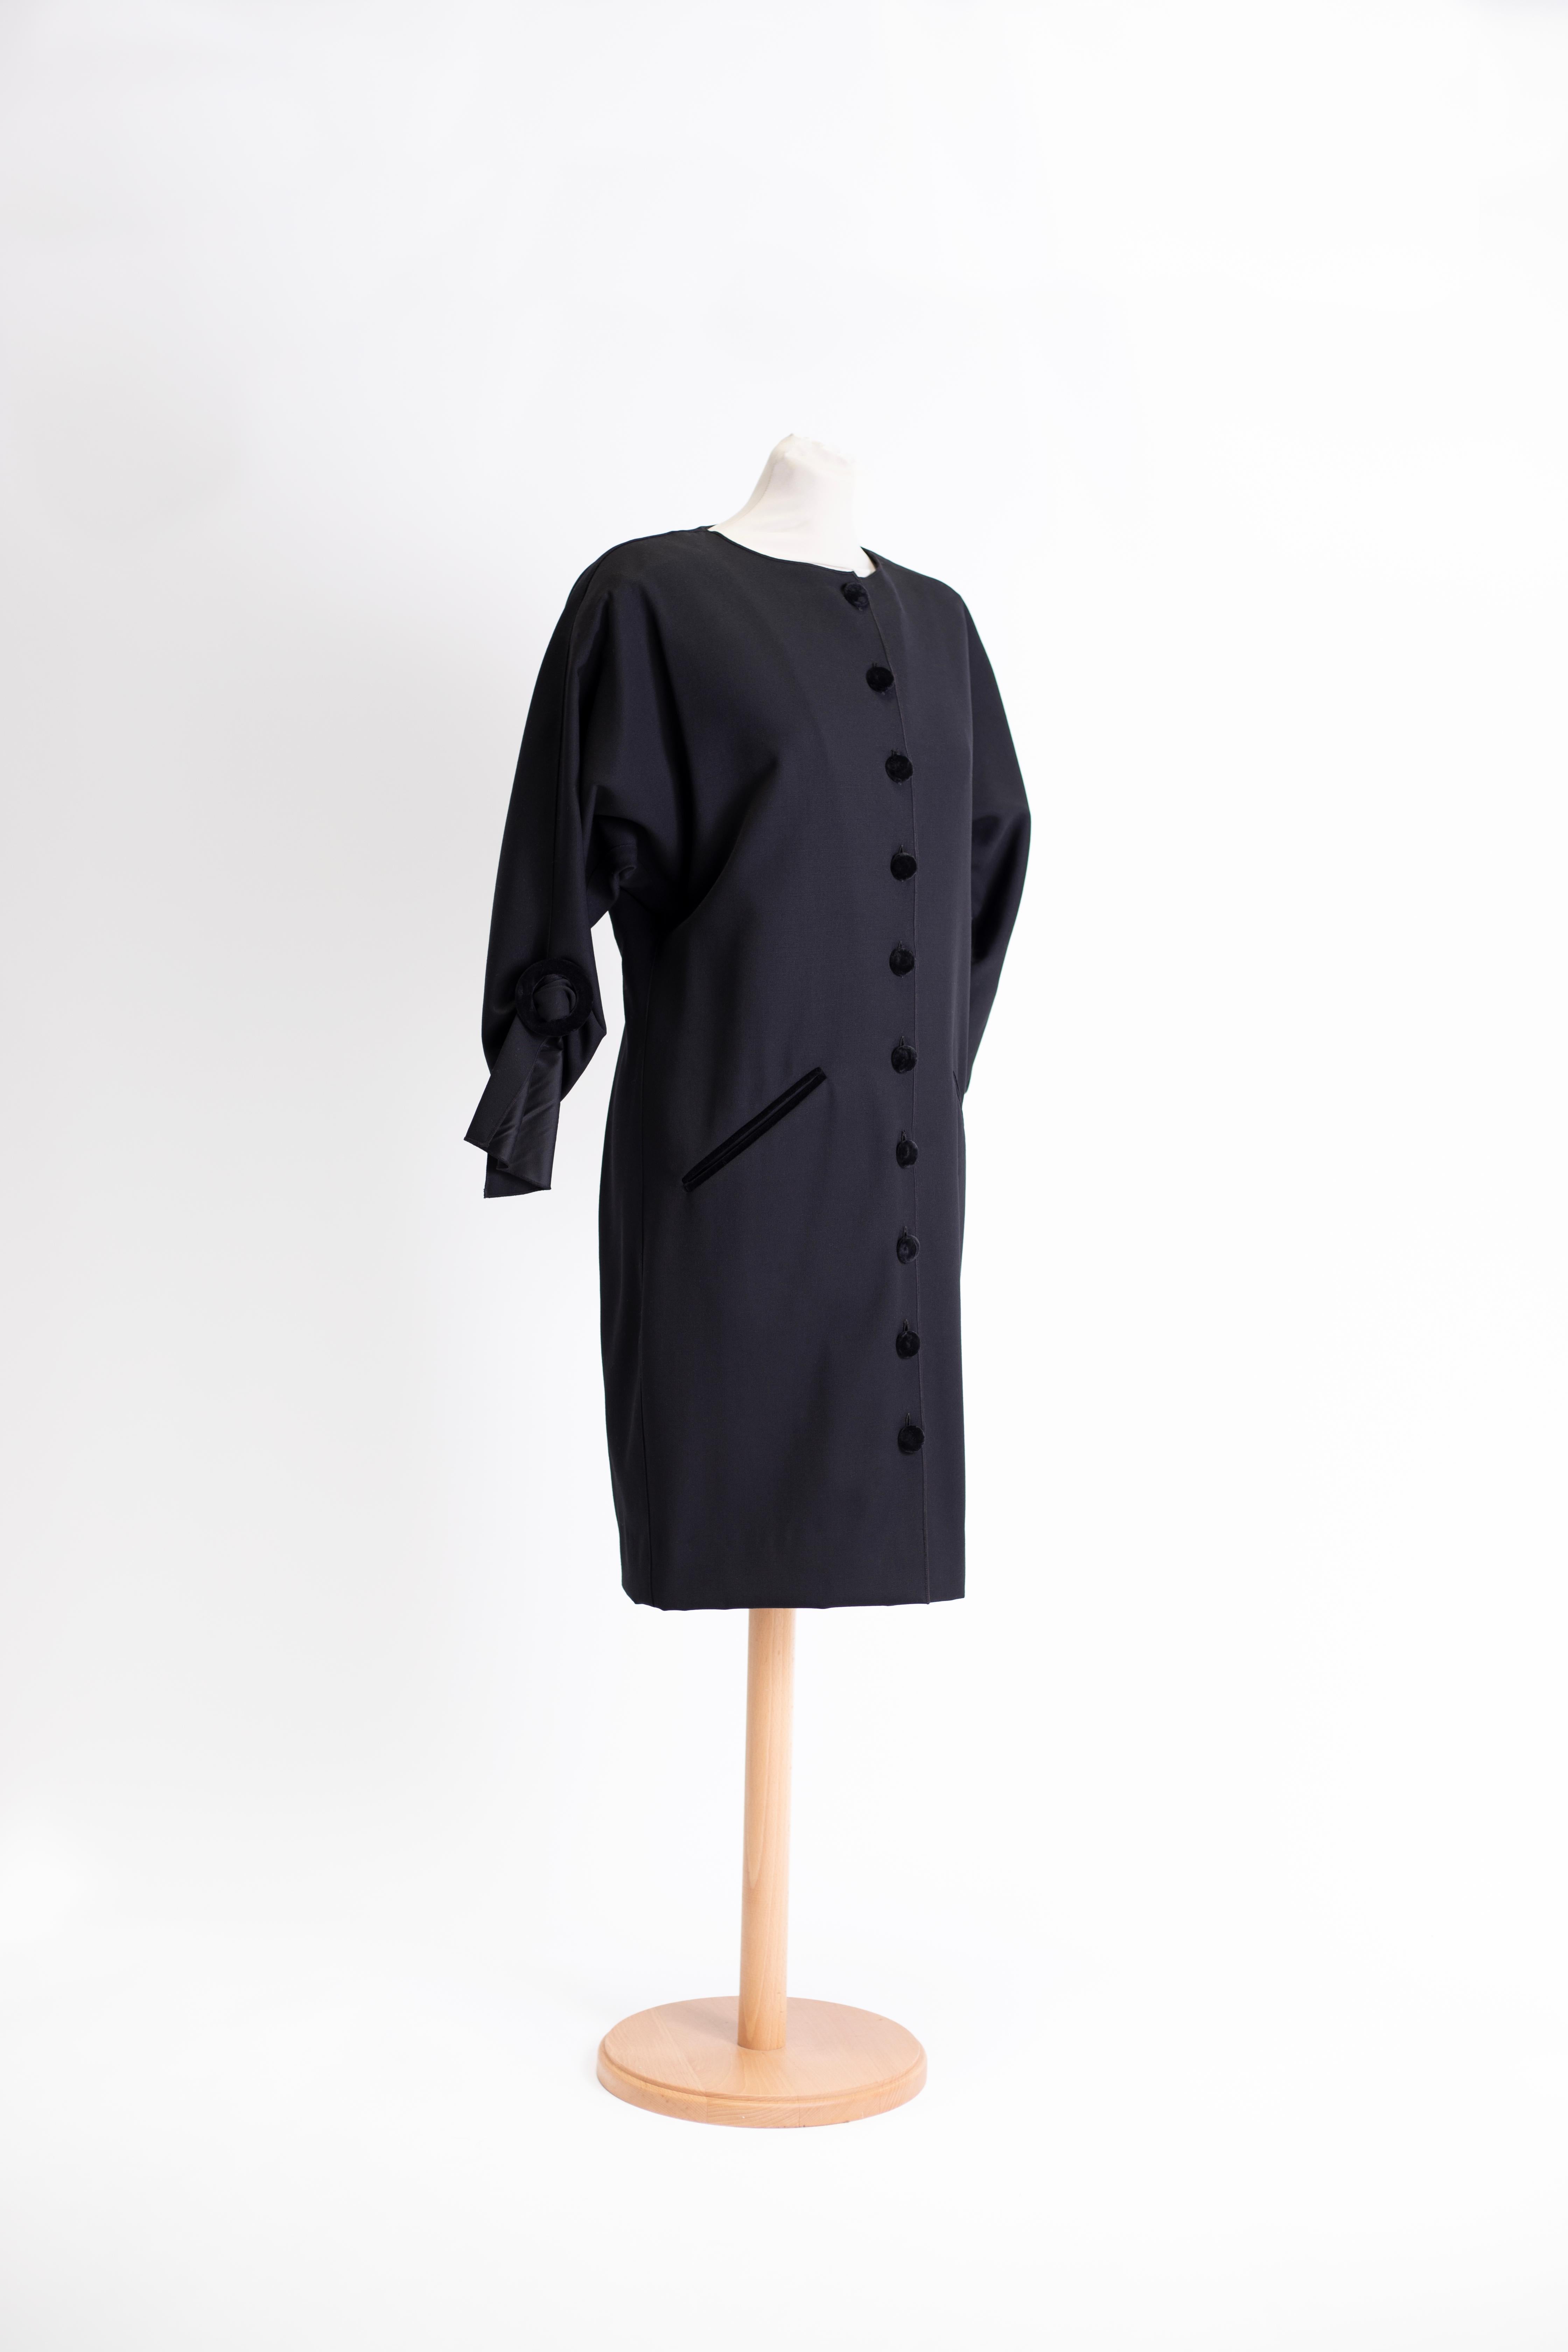 1980s Rocco Barocco gabardine dress, with 3/4 batwing sleeves with velvet details, button closure on the center front.

Size IT: 40
Size USA: 6

MEASURES
Waist: 80 CM
Length: 94 CM
Bust: 84 CM